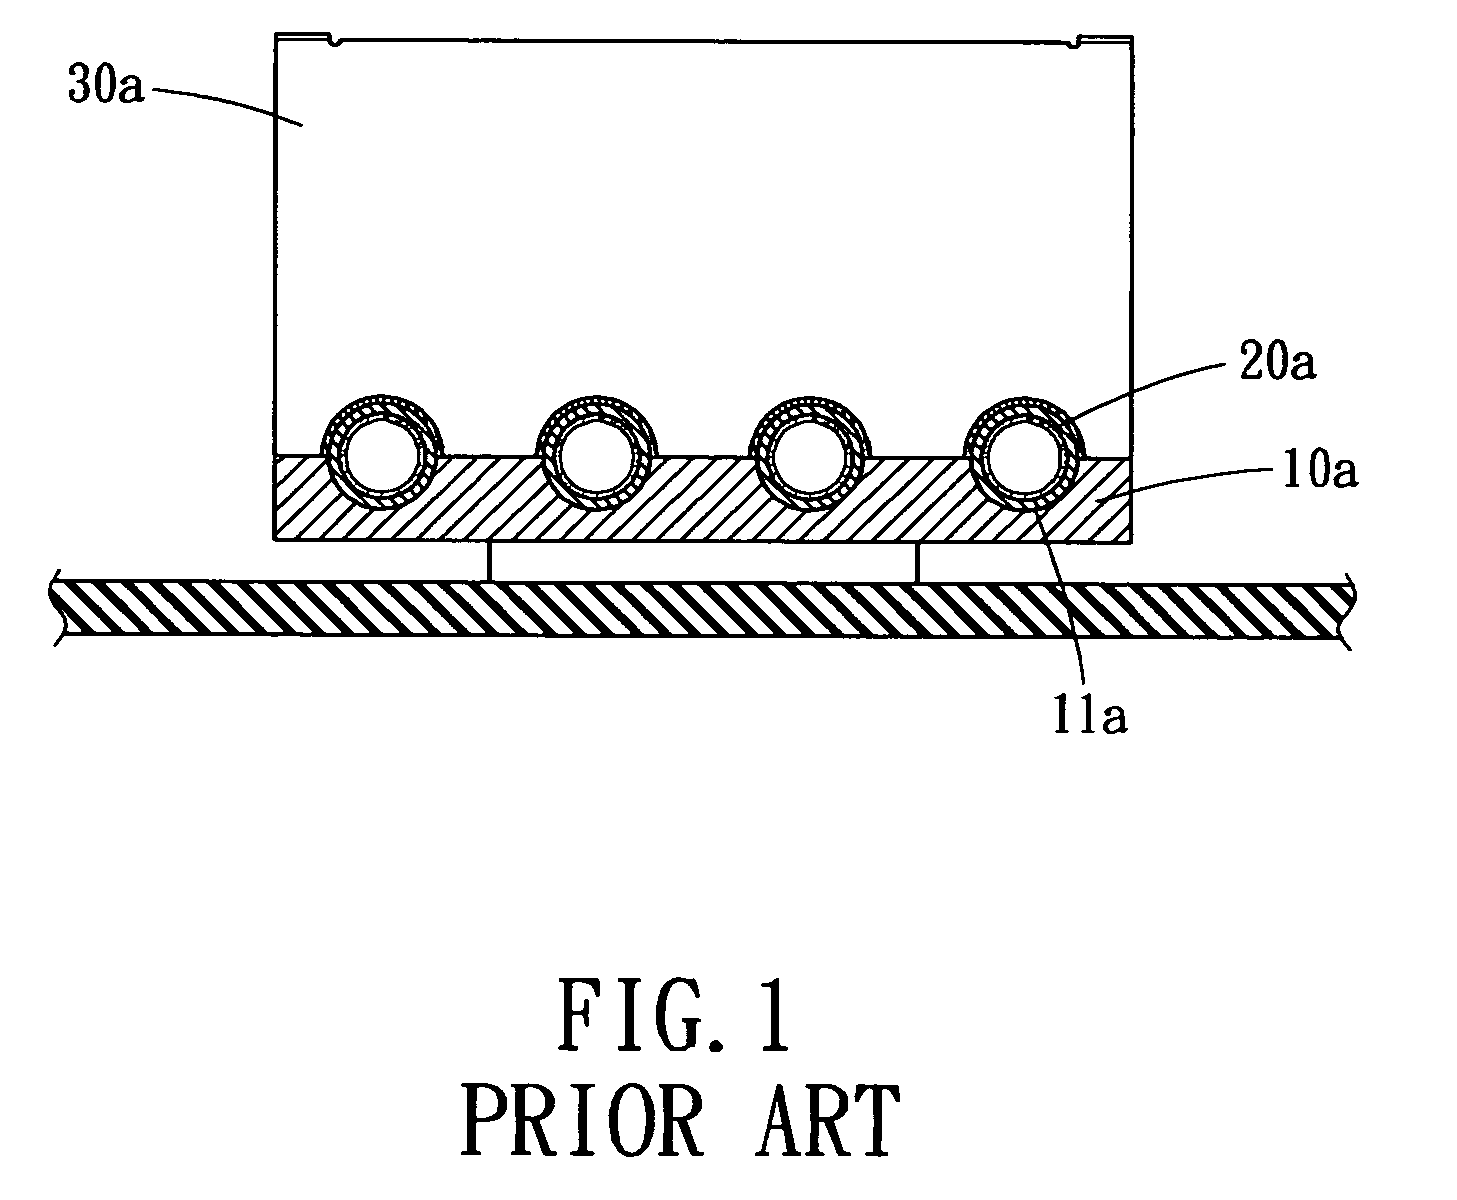 Structure of a uniform thermal conductive heat dissipation device